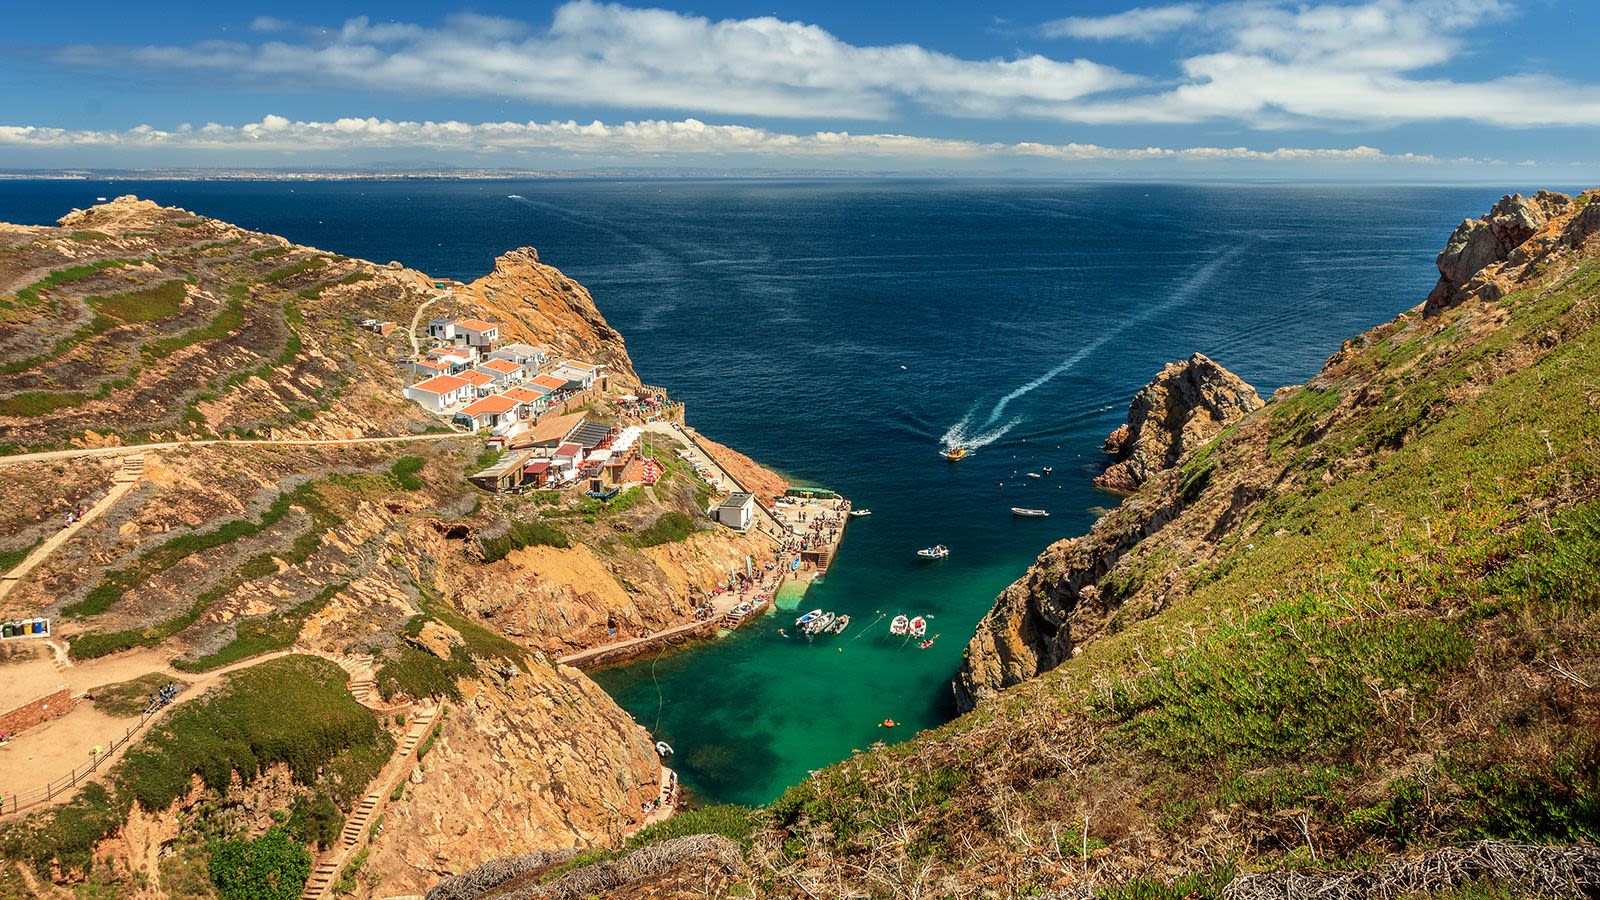 About six miles off the coast from Peniche, the Berlengas archipelago is an excellent scuba diving destination.